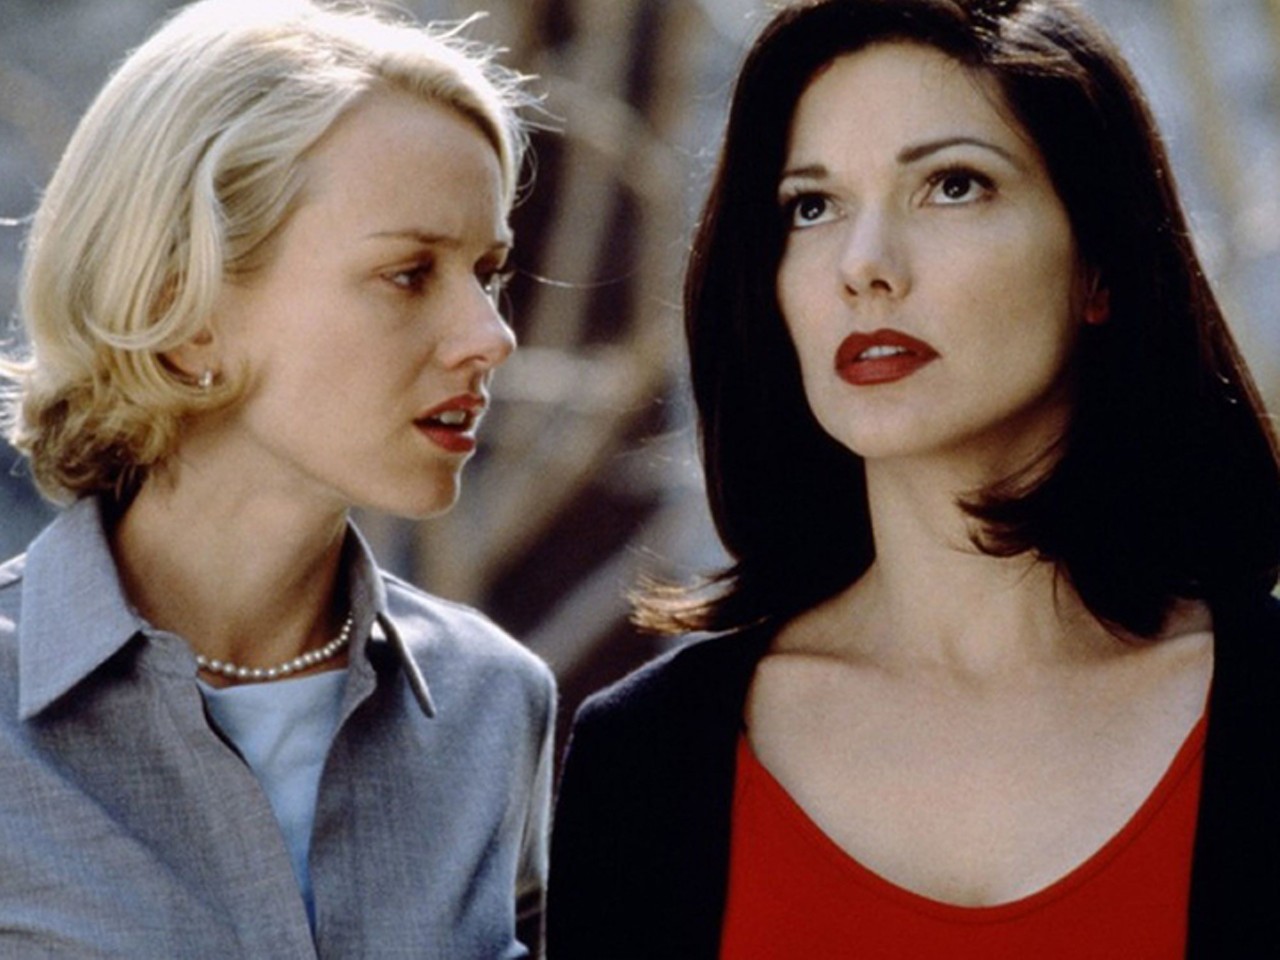 Sunday, Jan. 13Uncomfortable Brunch Presents: Mulholland Drive at Will's Pub